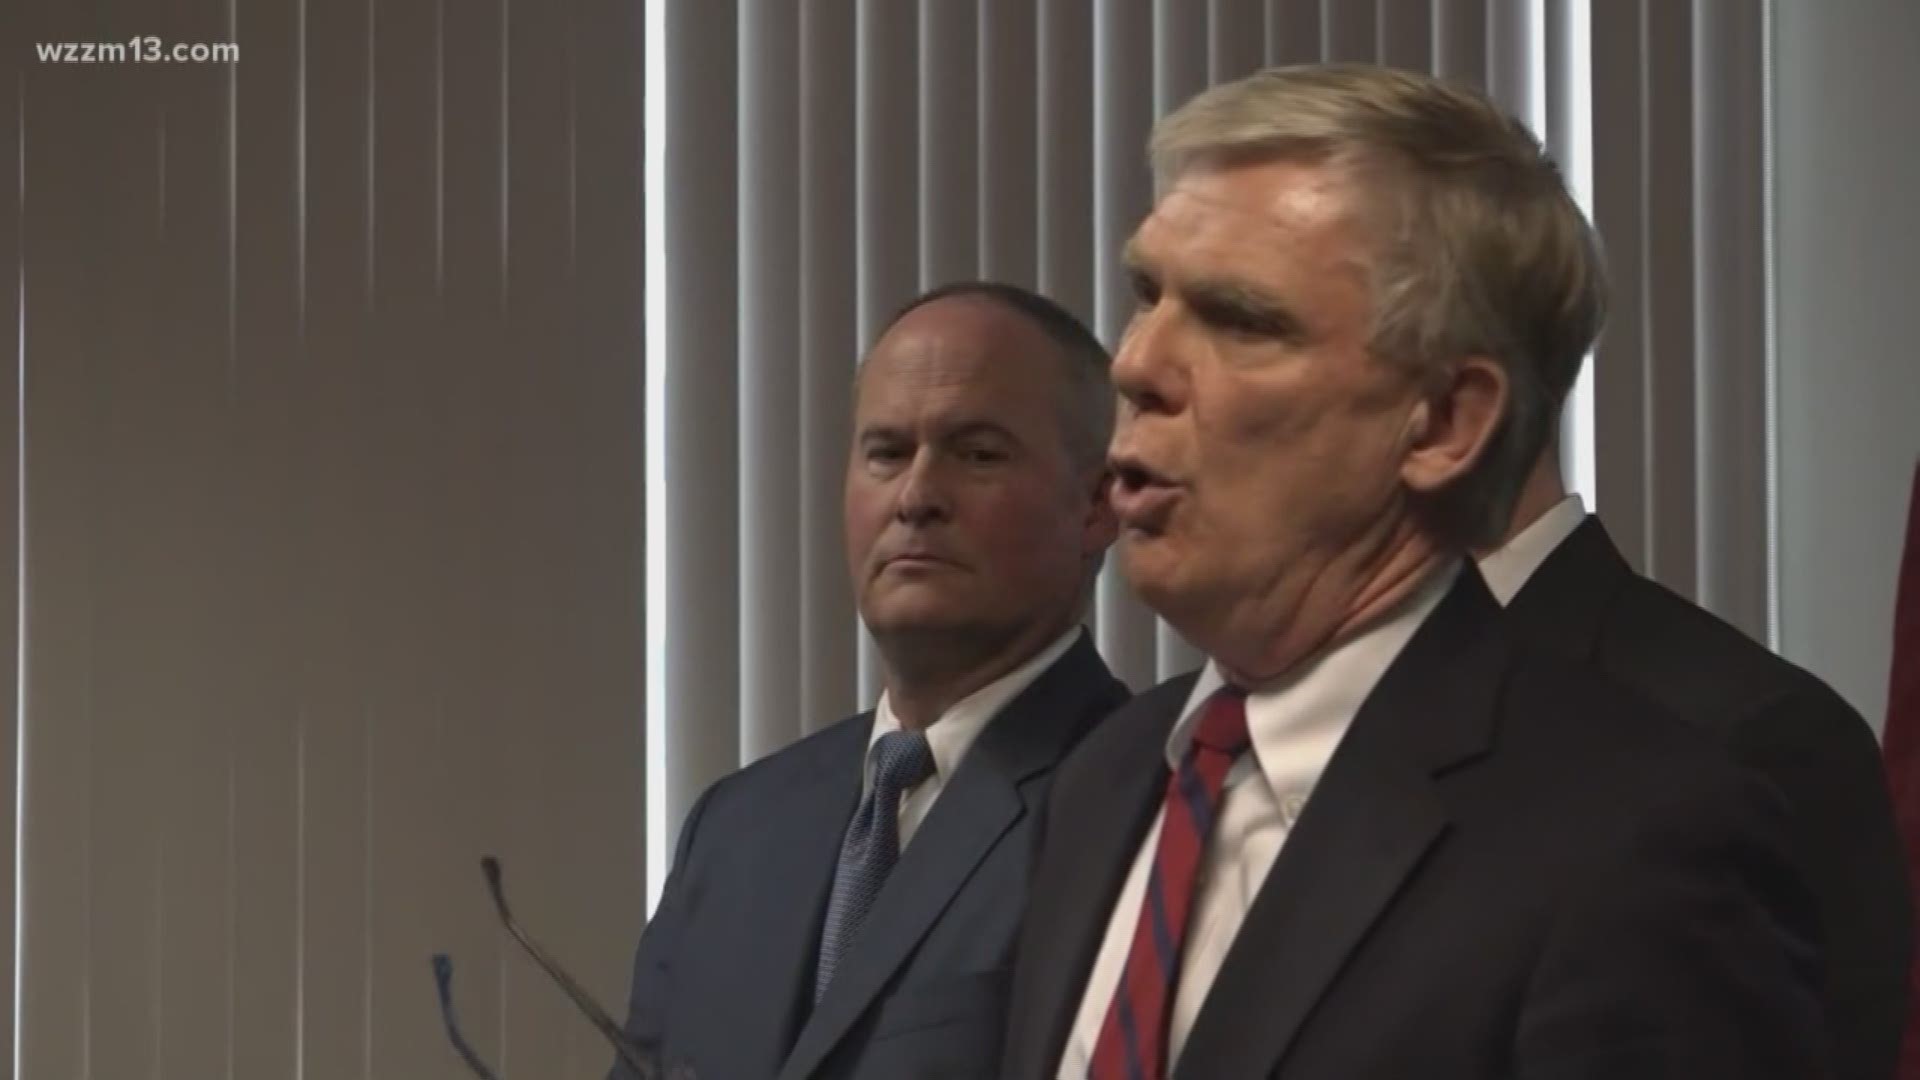 Special Prosecutor Bill Forsyth provides update on investigation into Michigan State University